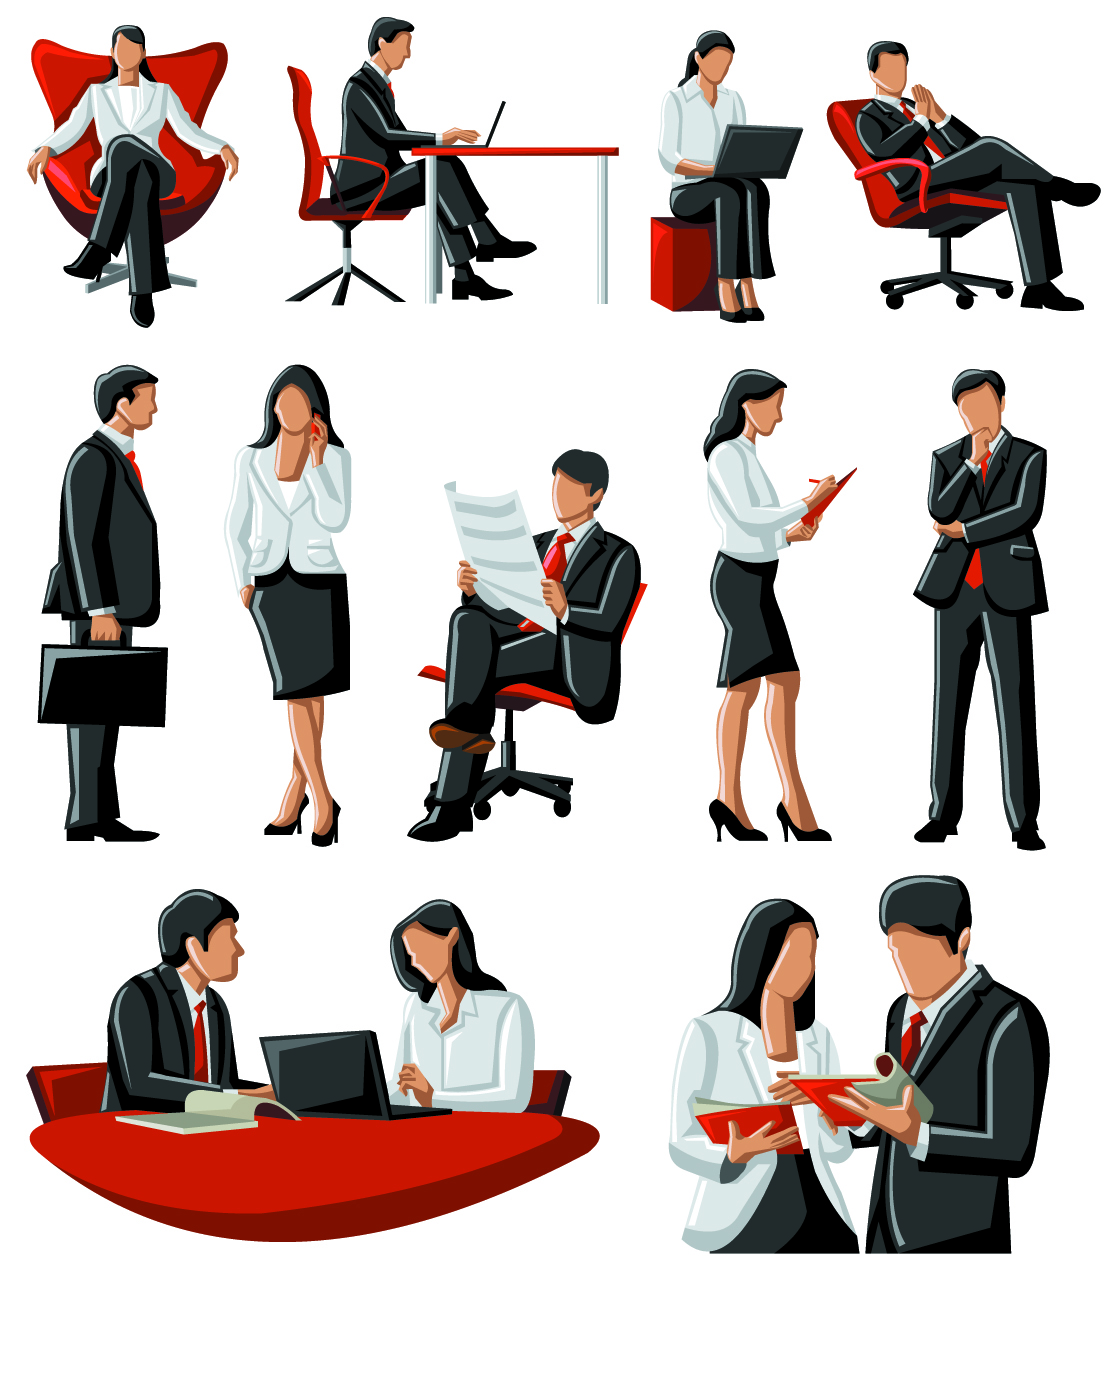 17 Vector Business Person Images